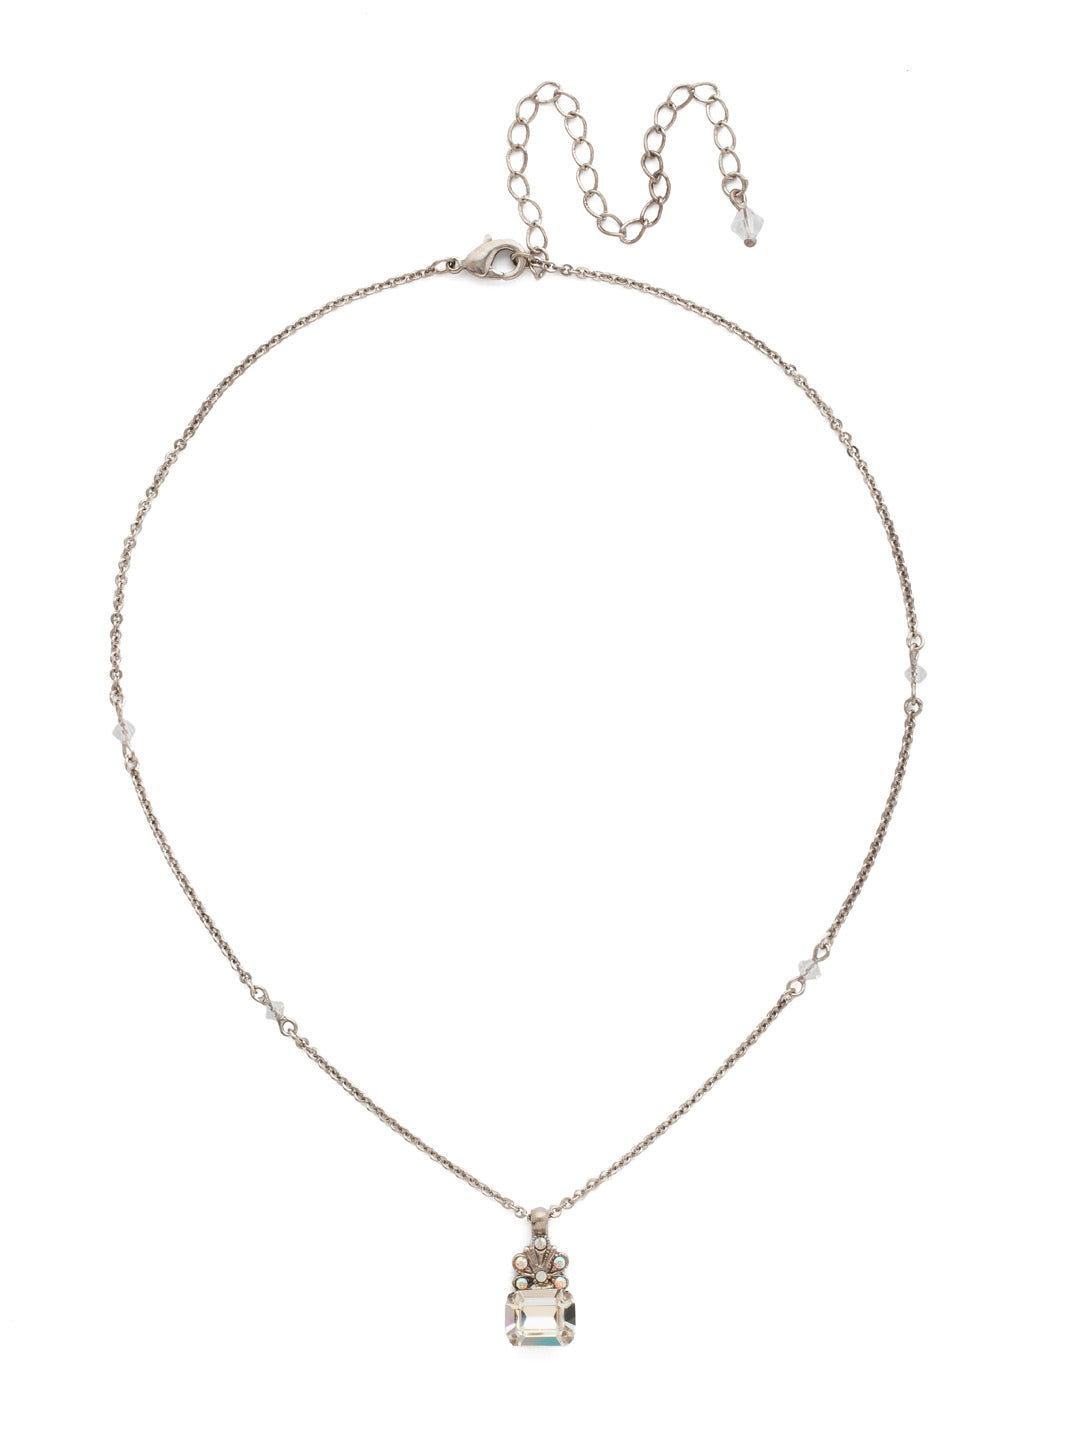 Crowning Glory  Necklace - NDP9ASWBR - <p>An enchanting emerald cut stone is crowned with an ornate crystal-encrusted design. From Sorrelli's White Bridal collection in our Antique Silver-tone finish.</p>